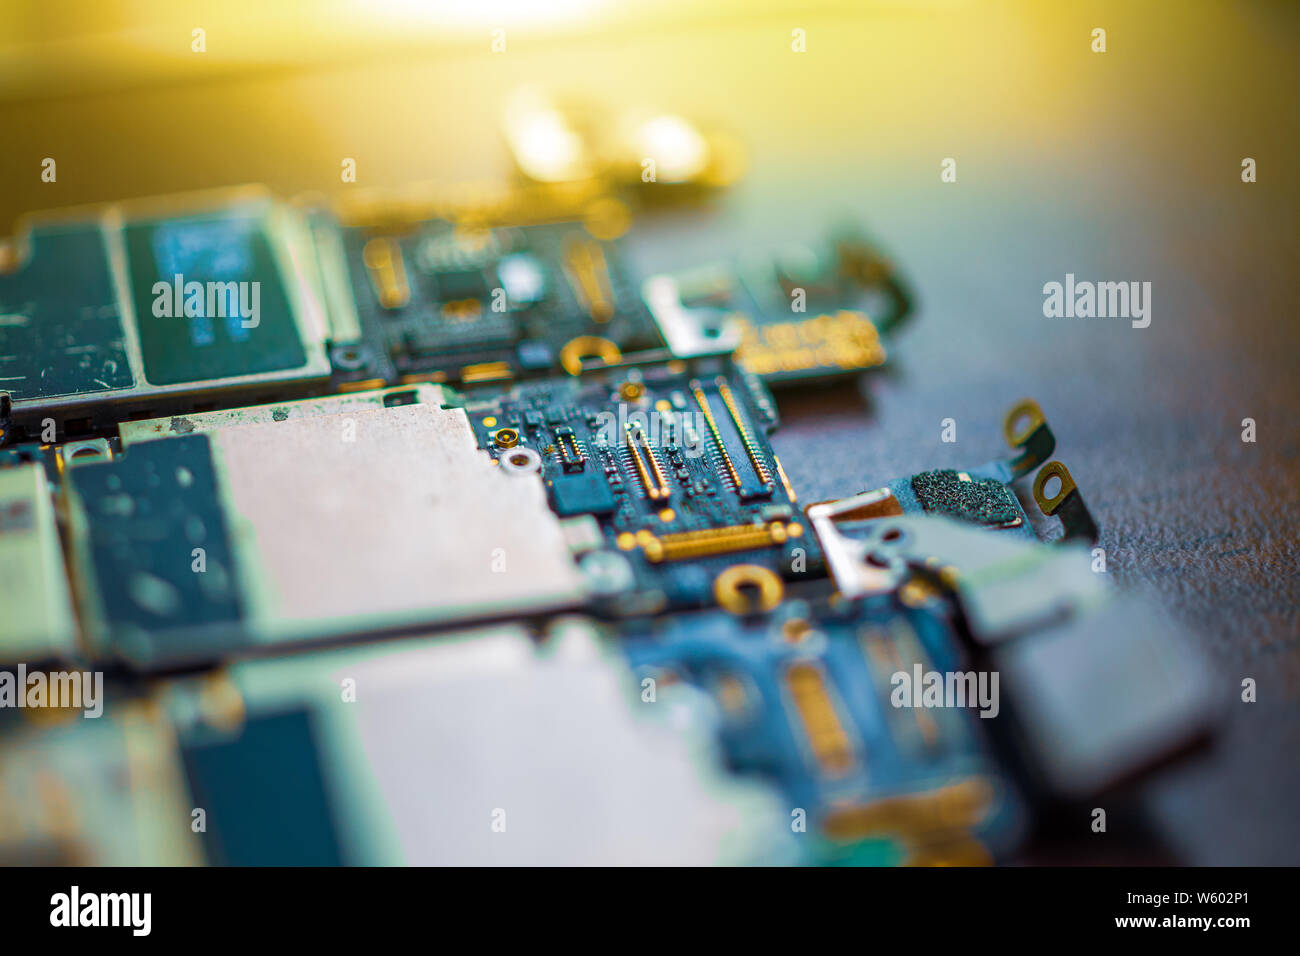 Electronic circuits with connectors Stock Photo